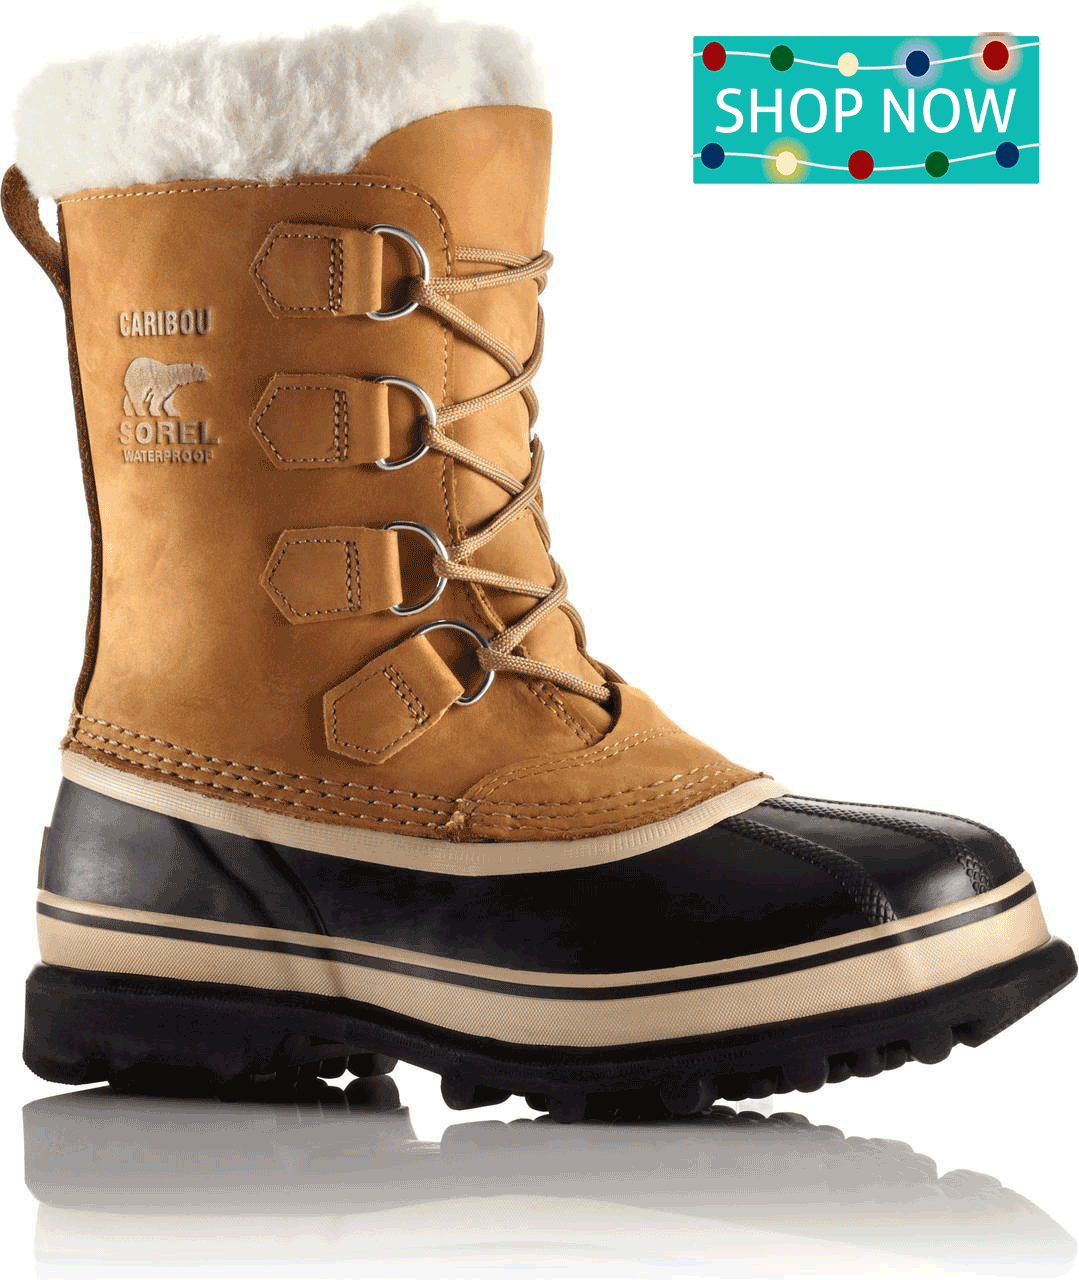 What is the Difference Between Snow Boots and Winter Boots? Englin's